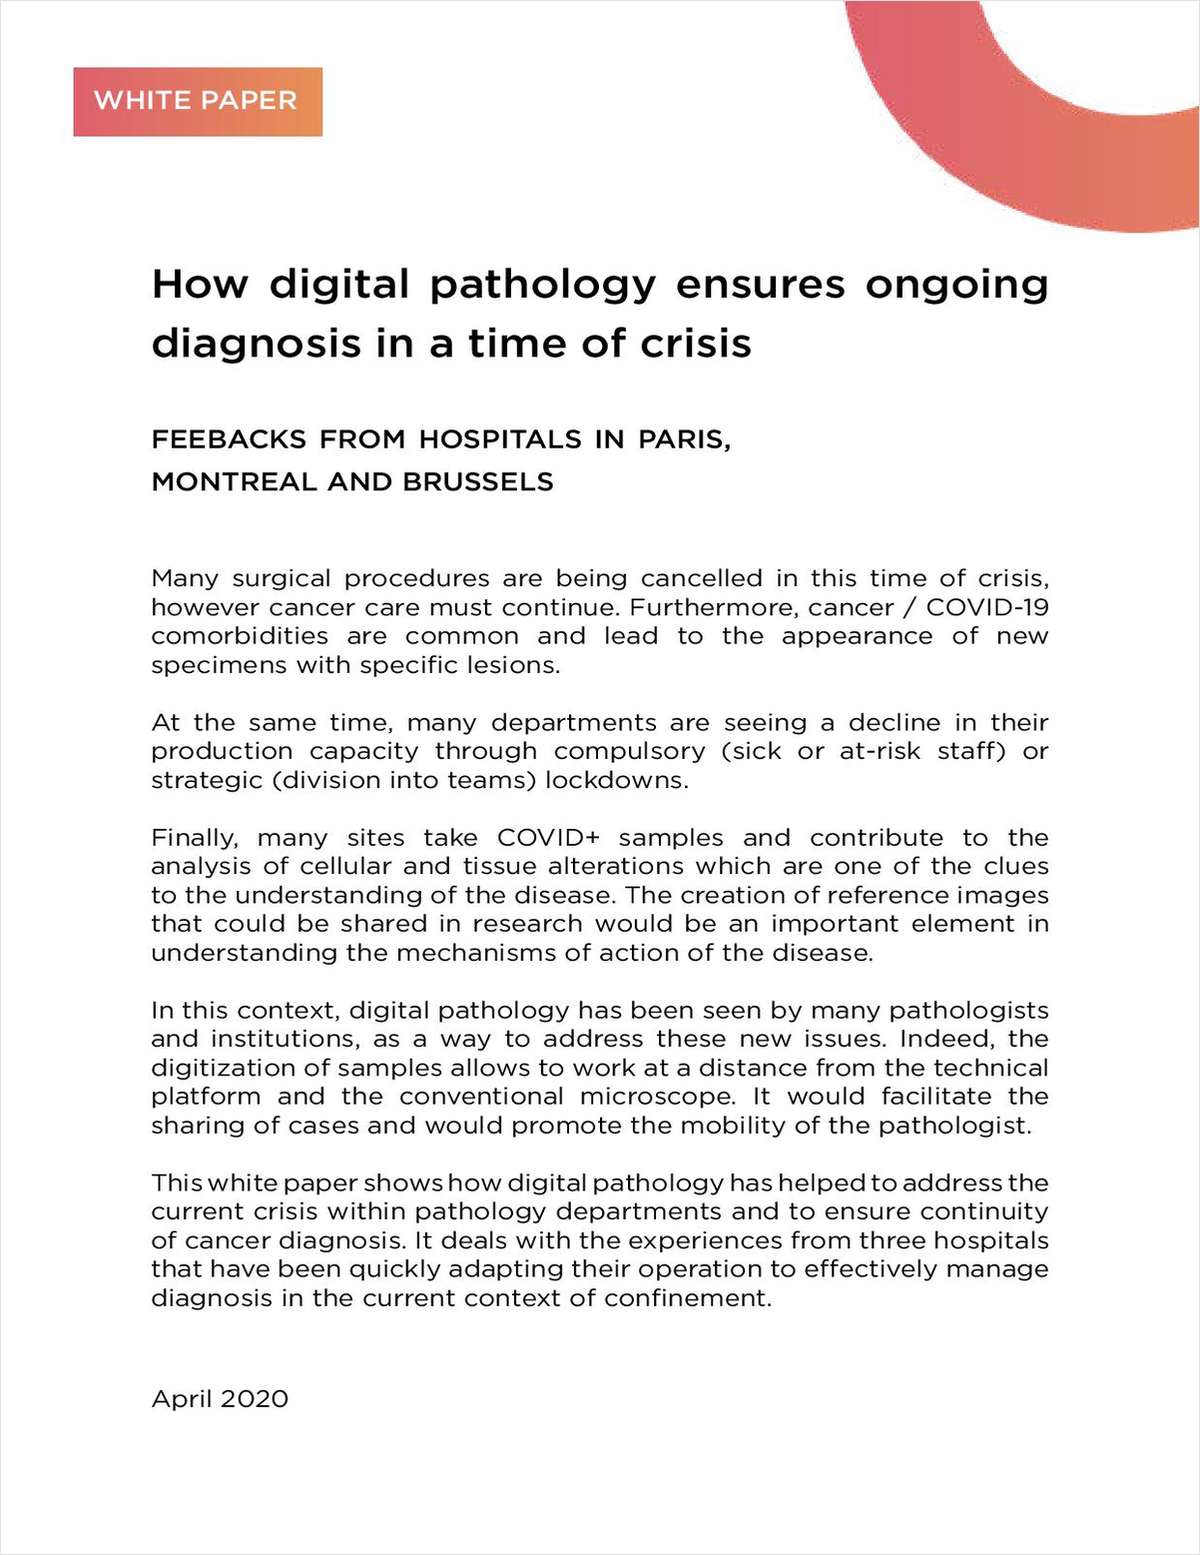 How Digital Pathology Ensures Ongoing Diagnosis in a Time of Crisis